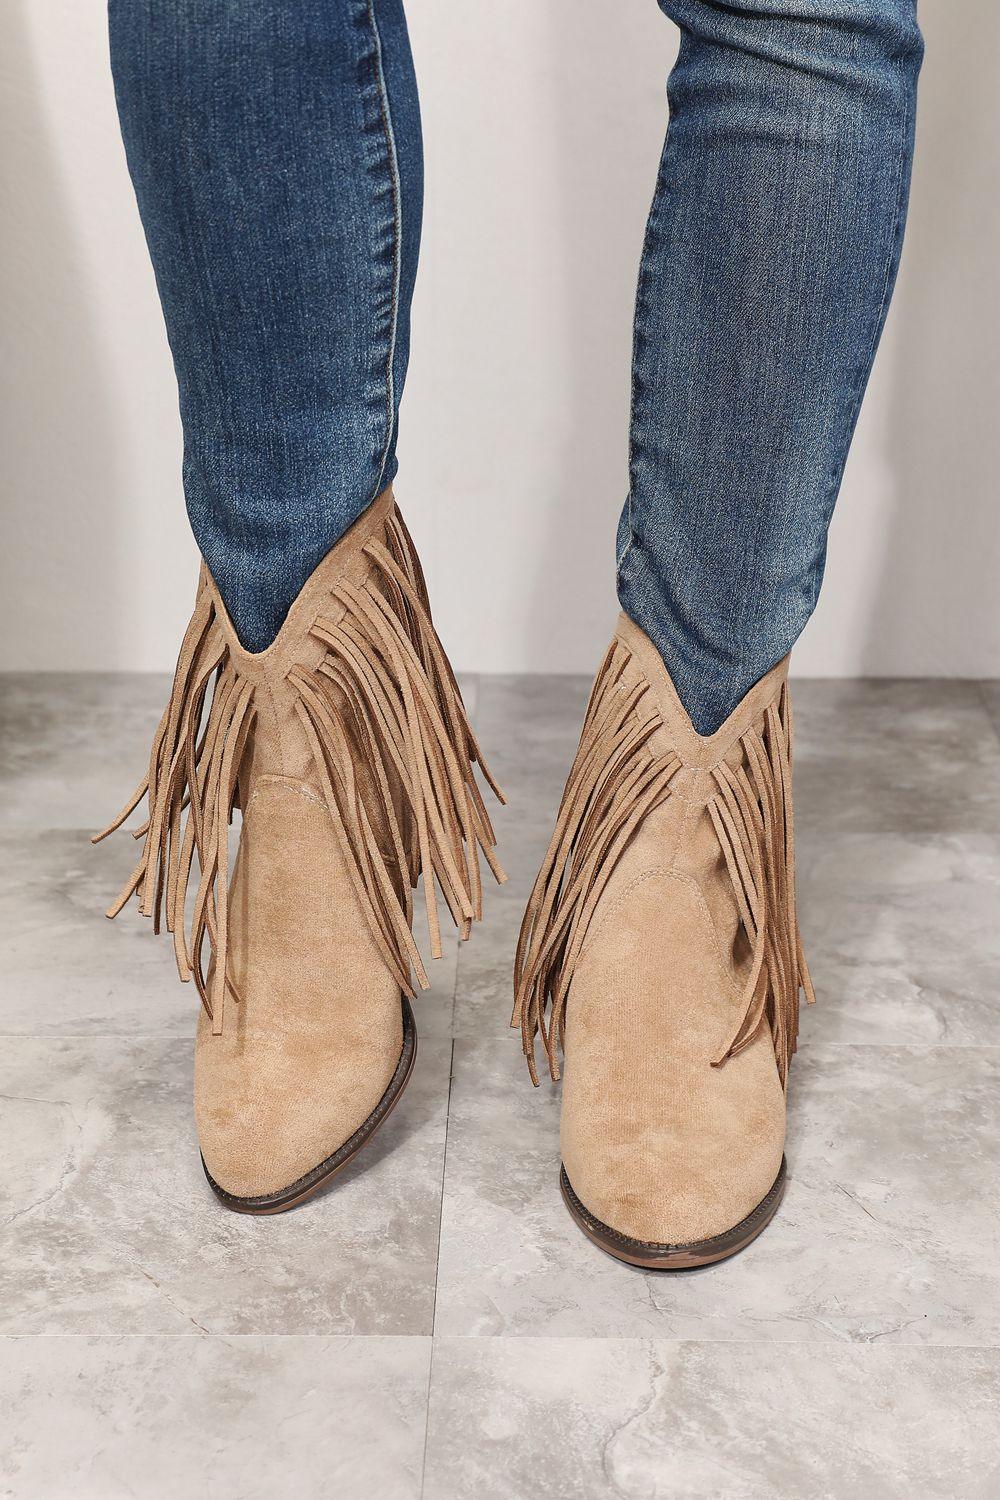 Fringy Cowgirl Western Ankle Boots - Klazzi Fashion Boutique